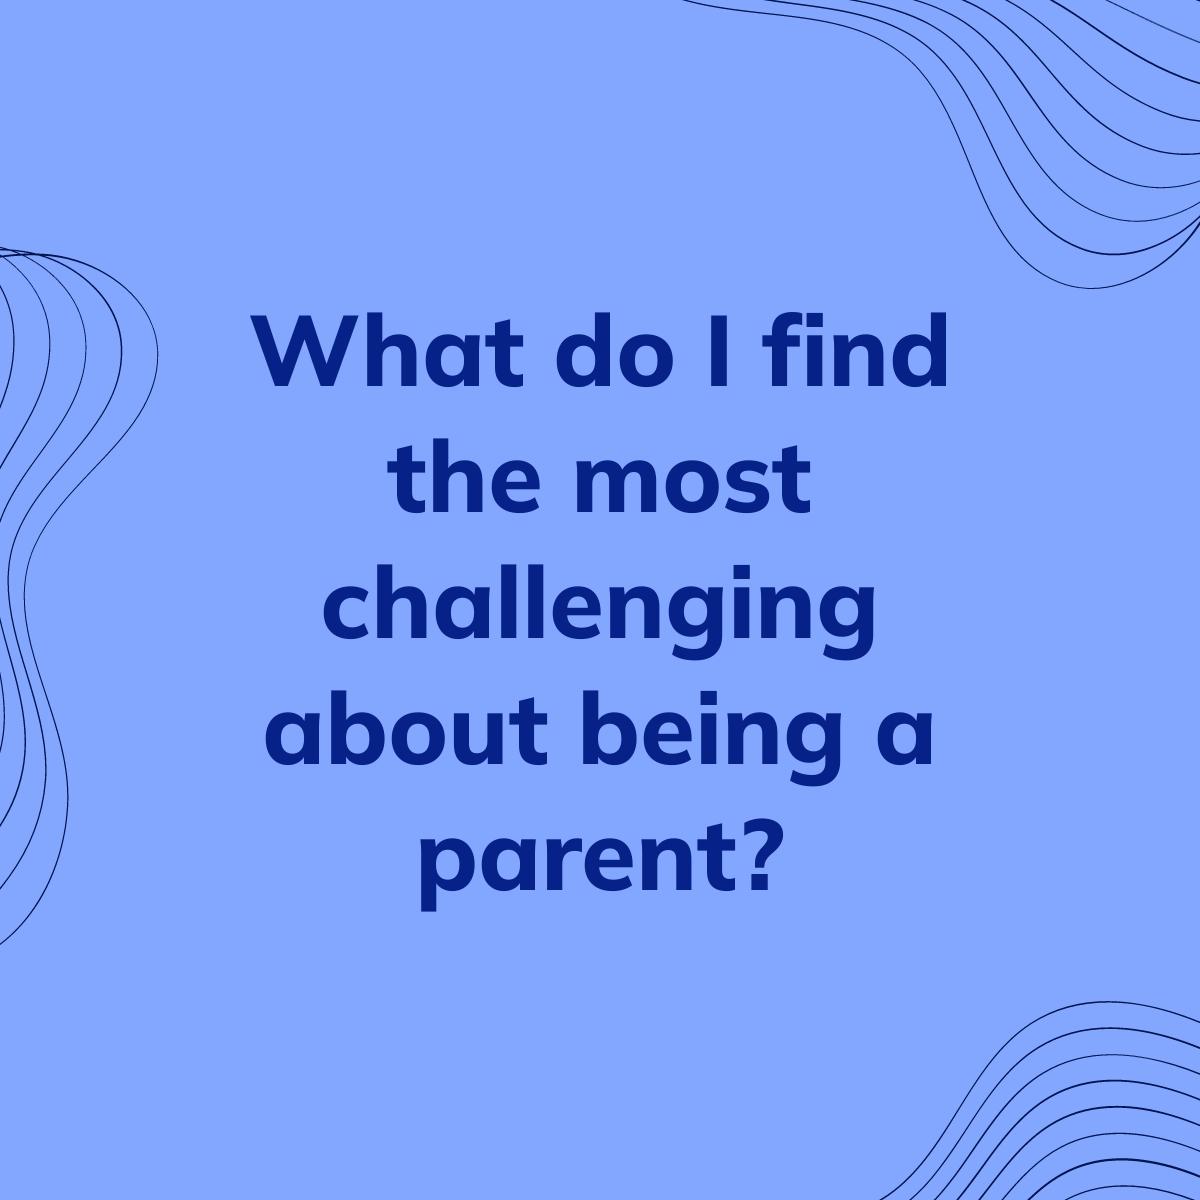 Journal Prompt: What do I find the most challenging about being a parent?